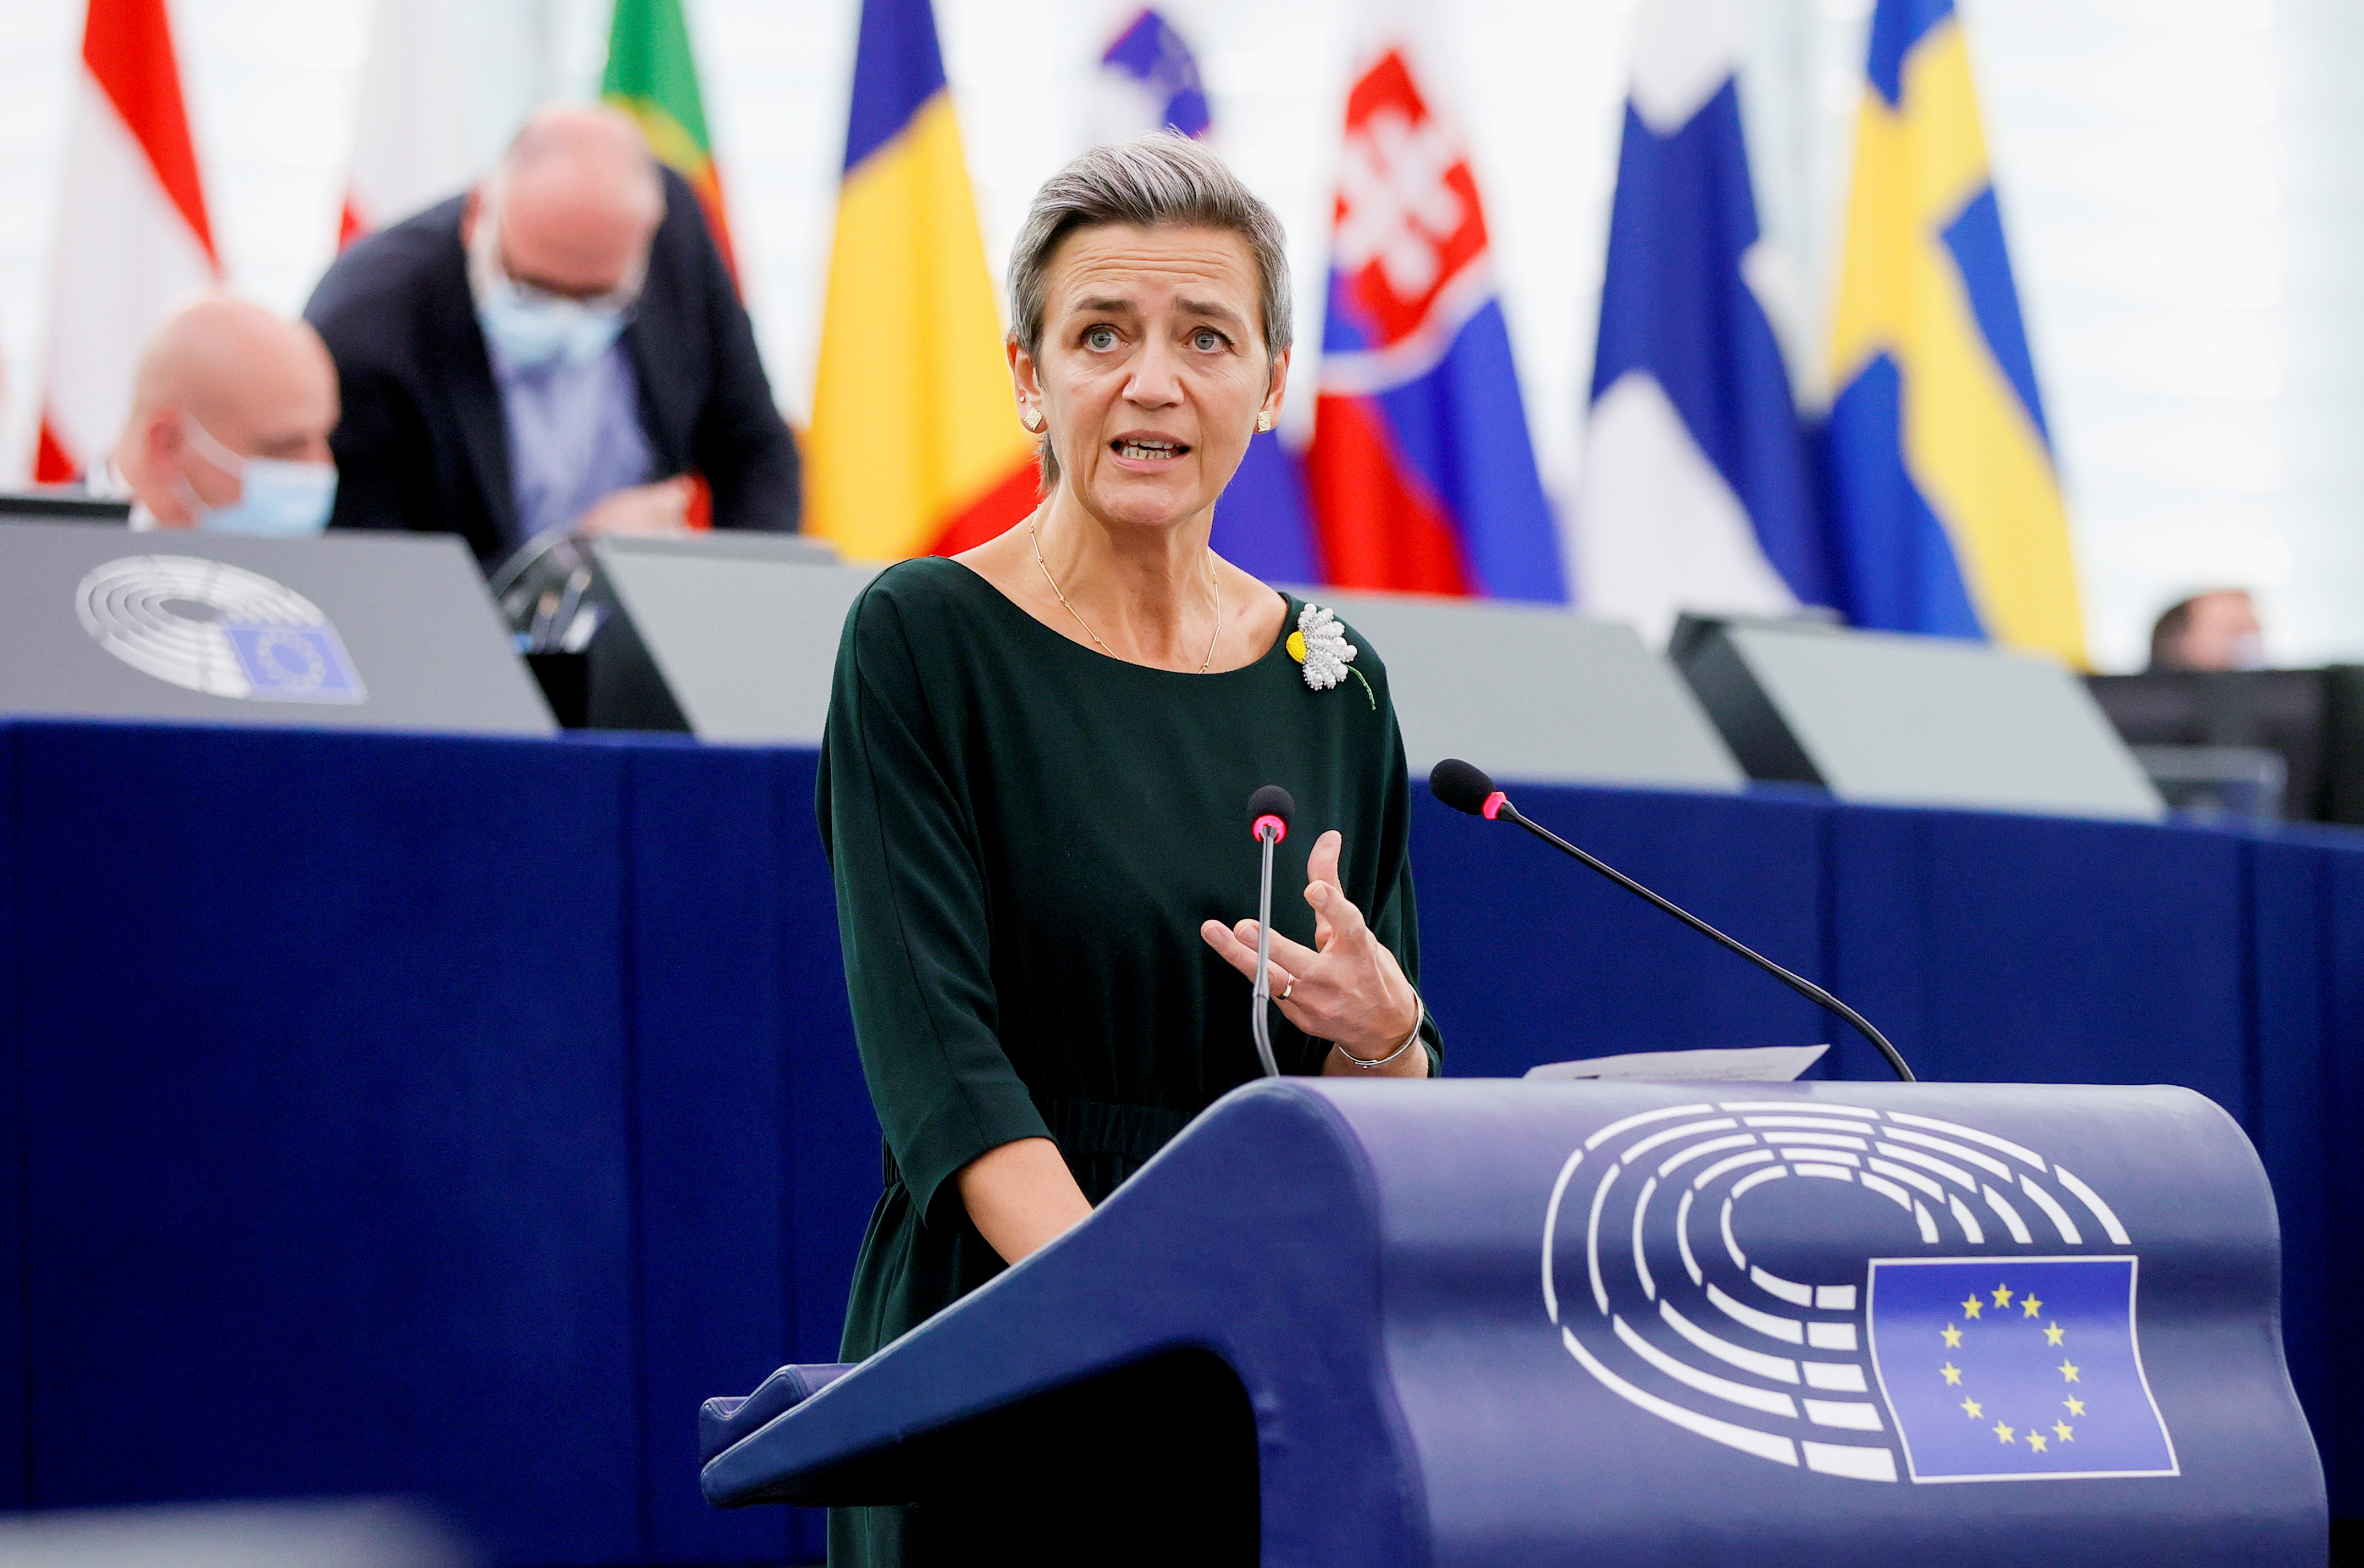 European Commission's executive Vice President Margrethe Vestager delivers a speech during a debate on EU-Taiwan political relations and cooperation at the European Parliament in Strasbourg, France, October 19, 2021. Ronald Wittek/Pool via REUTERS